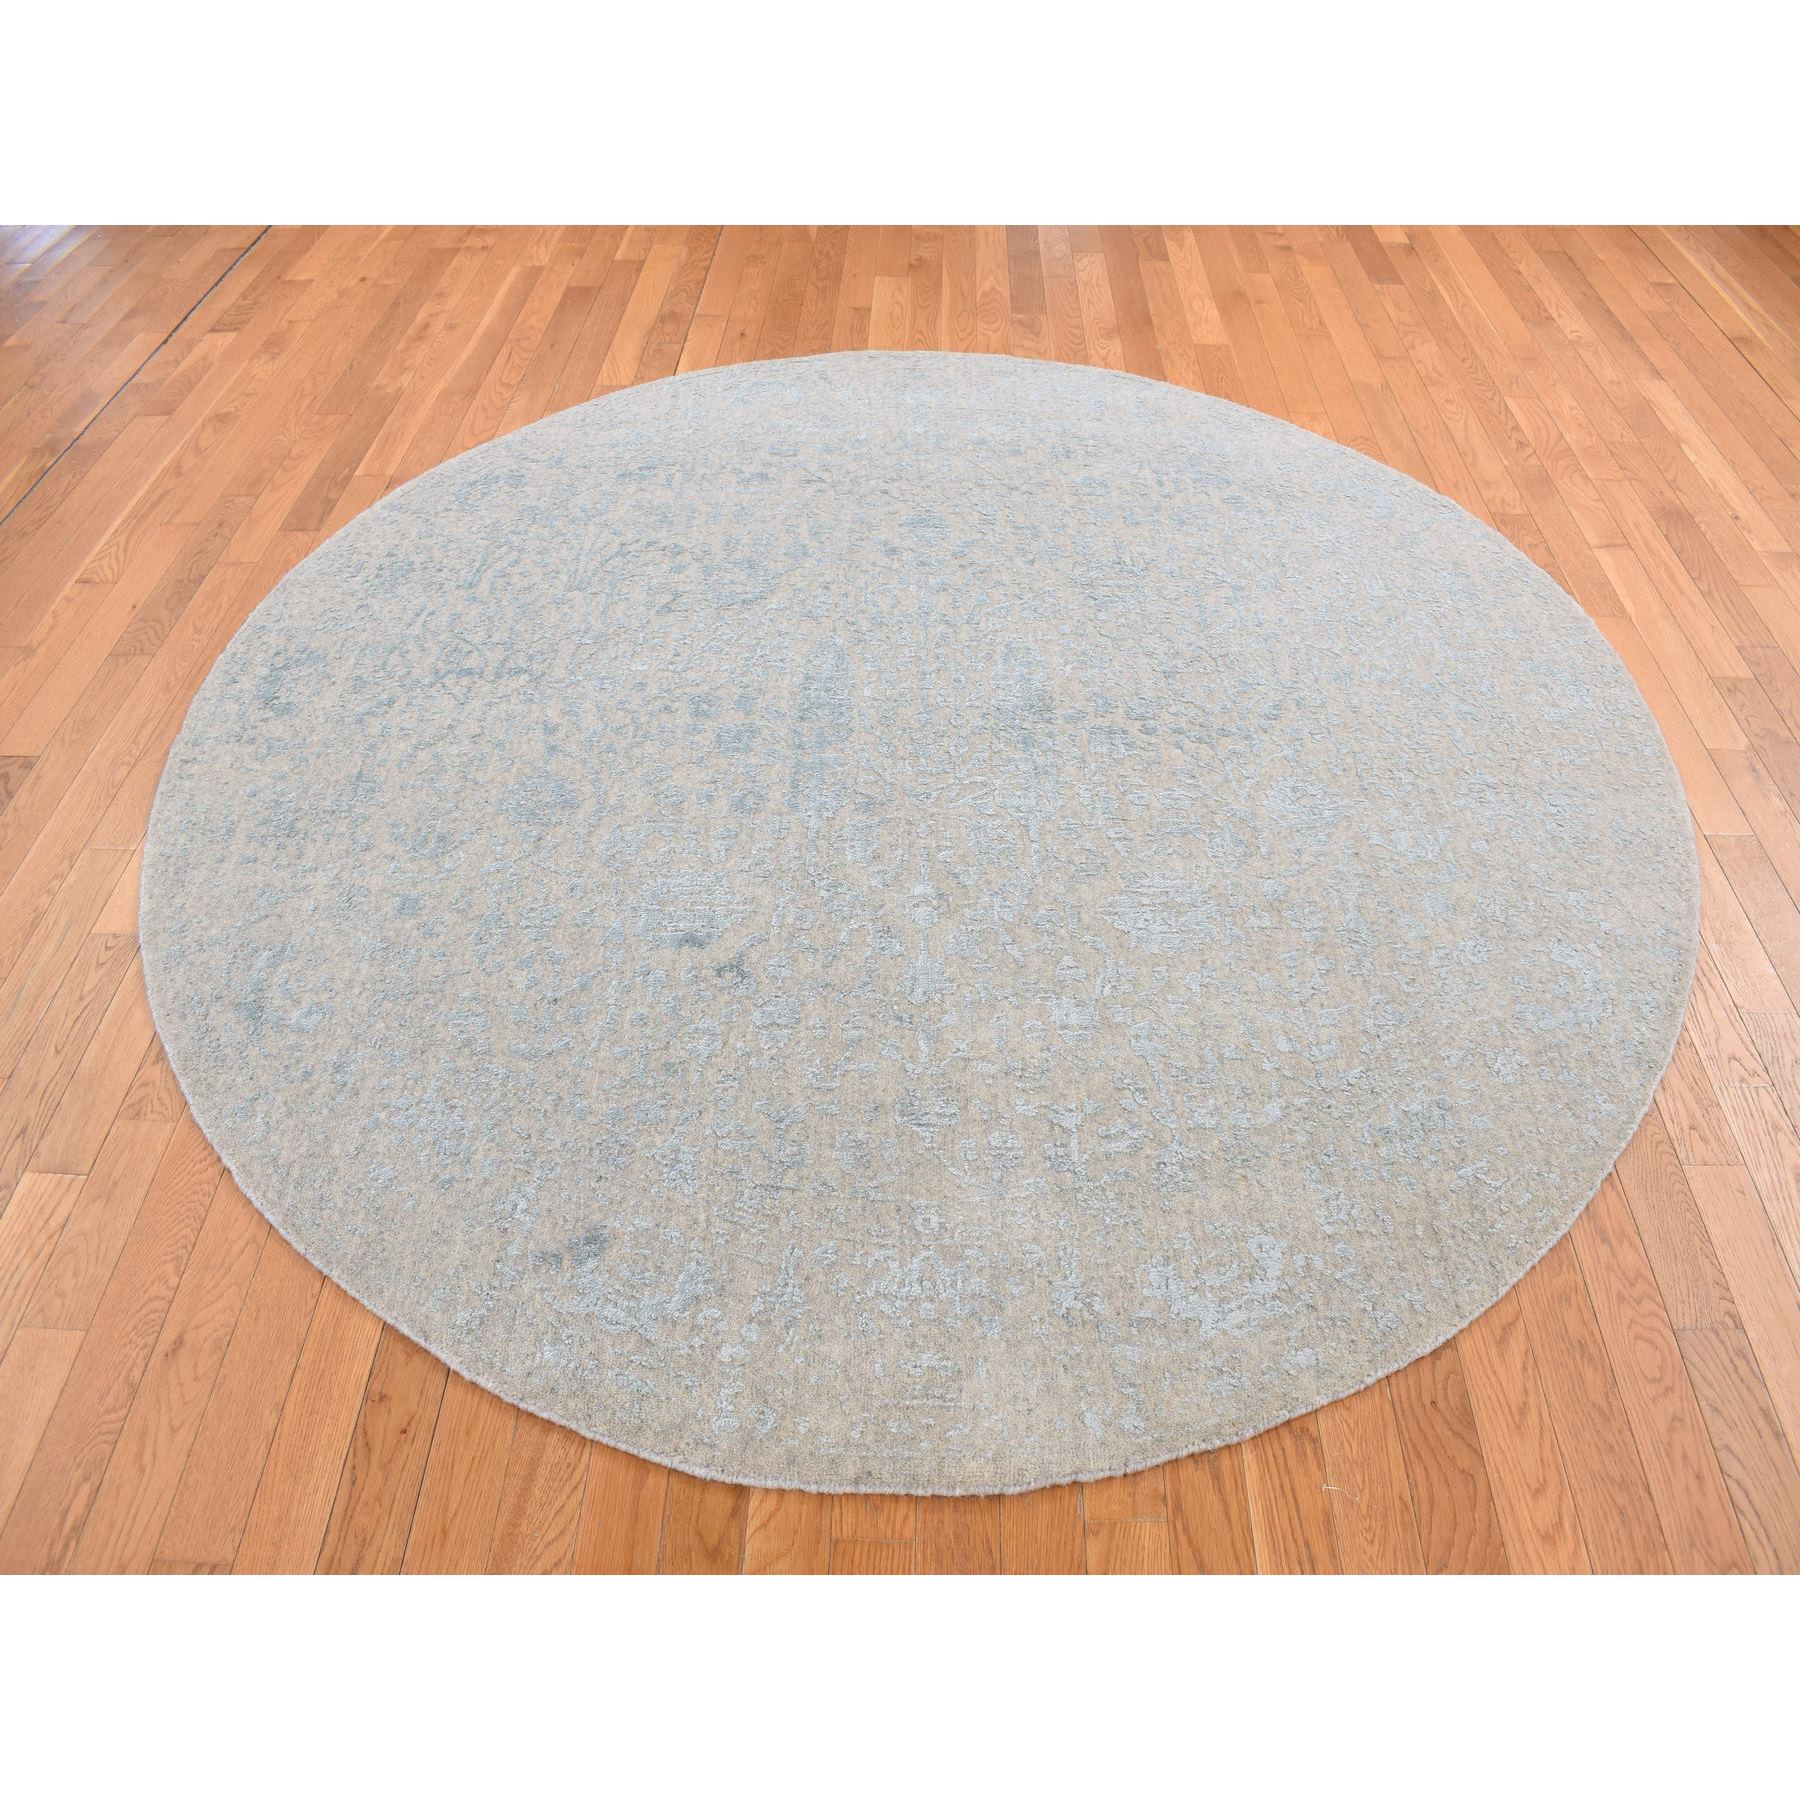 8'x8' Thunder Gray, Broken Cypress Tree Design, Wool and Silk, Thick, Hand Loomed, Round Oriental Rug 